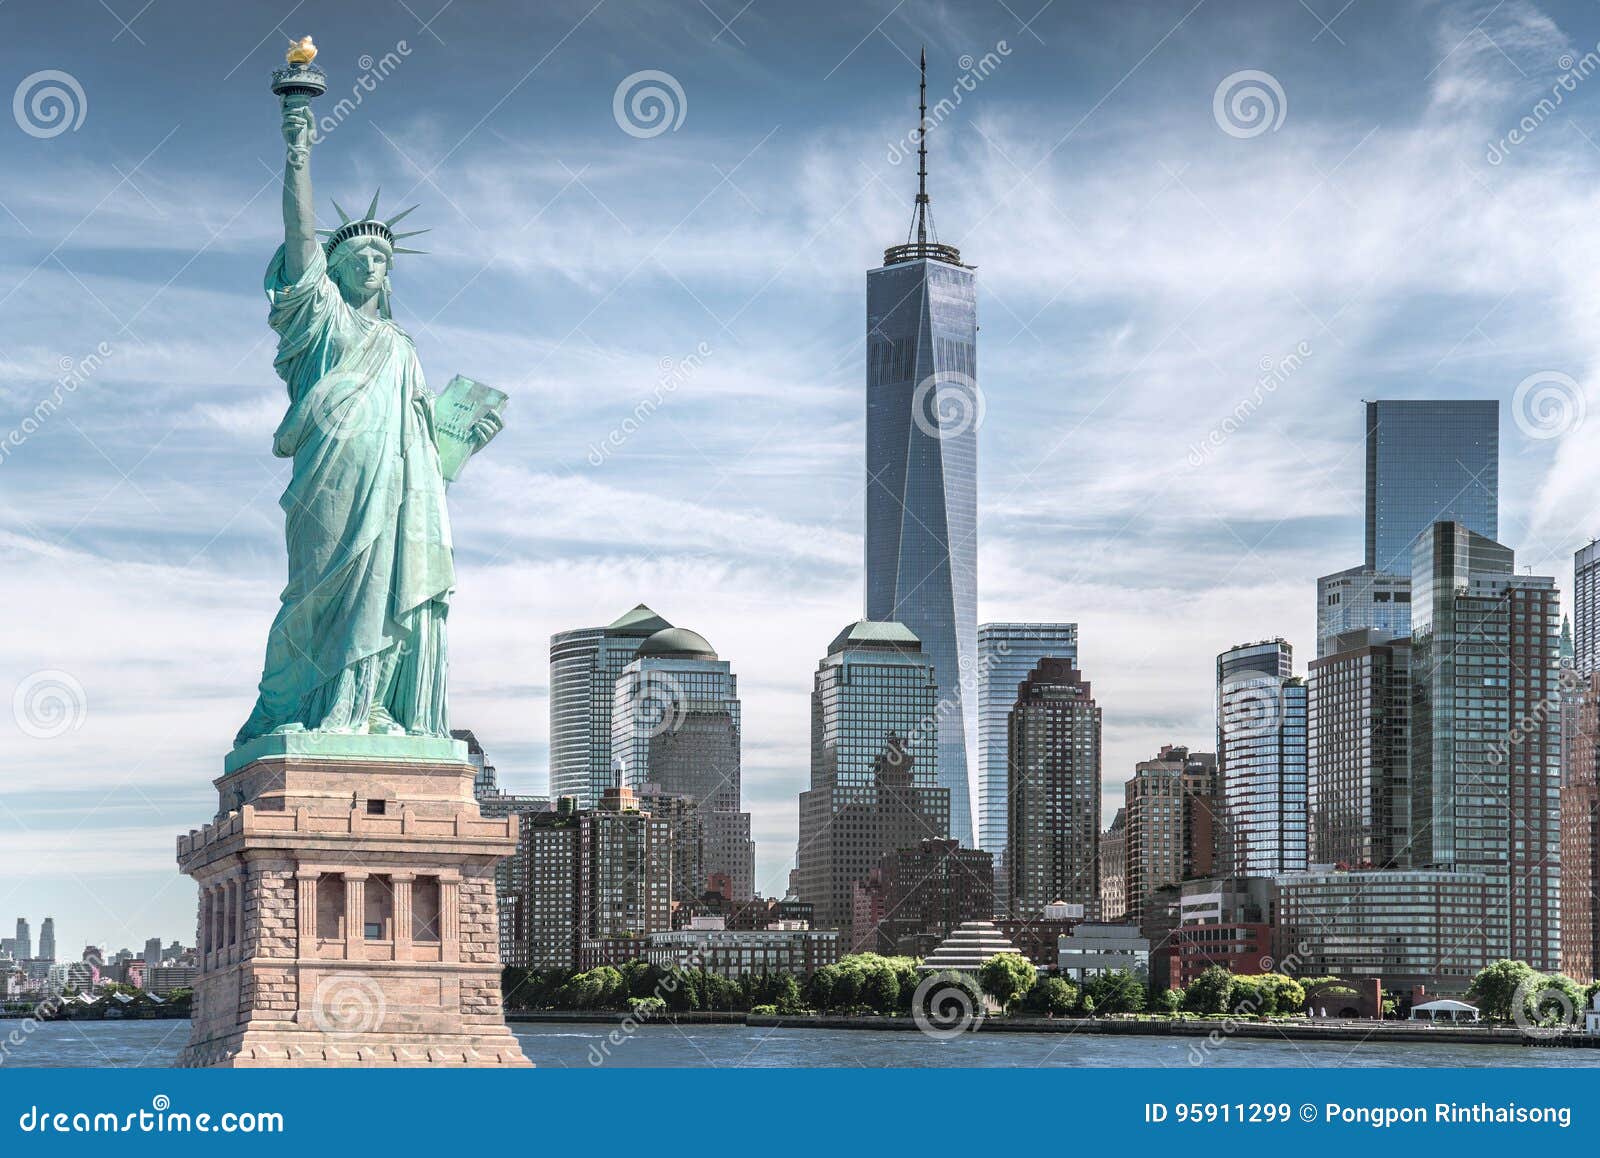 the statue of liberty with world trade center background, landmarks of new york city